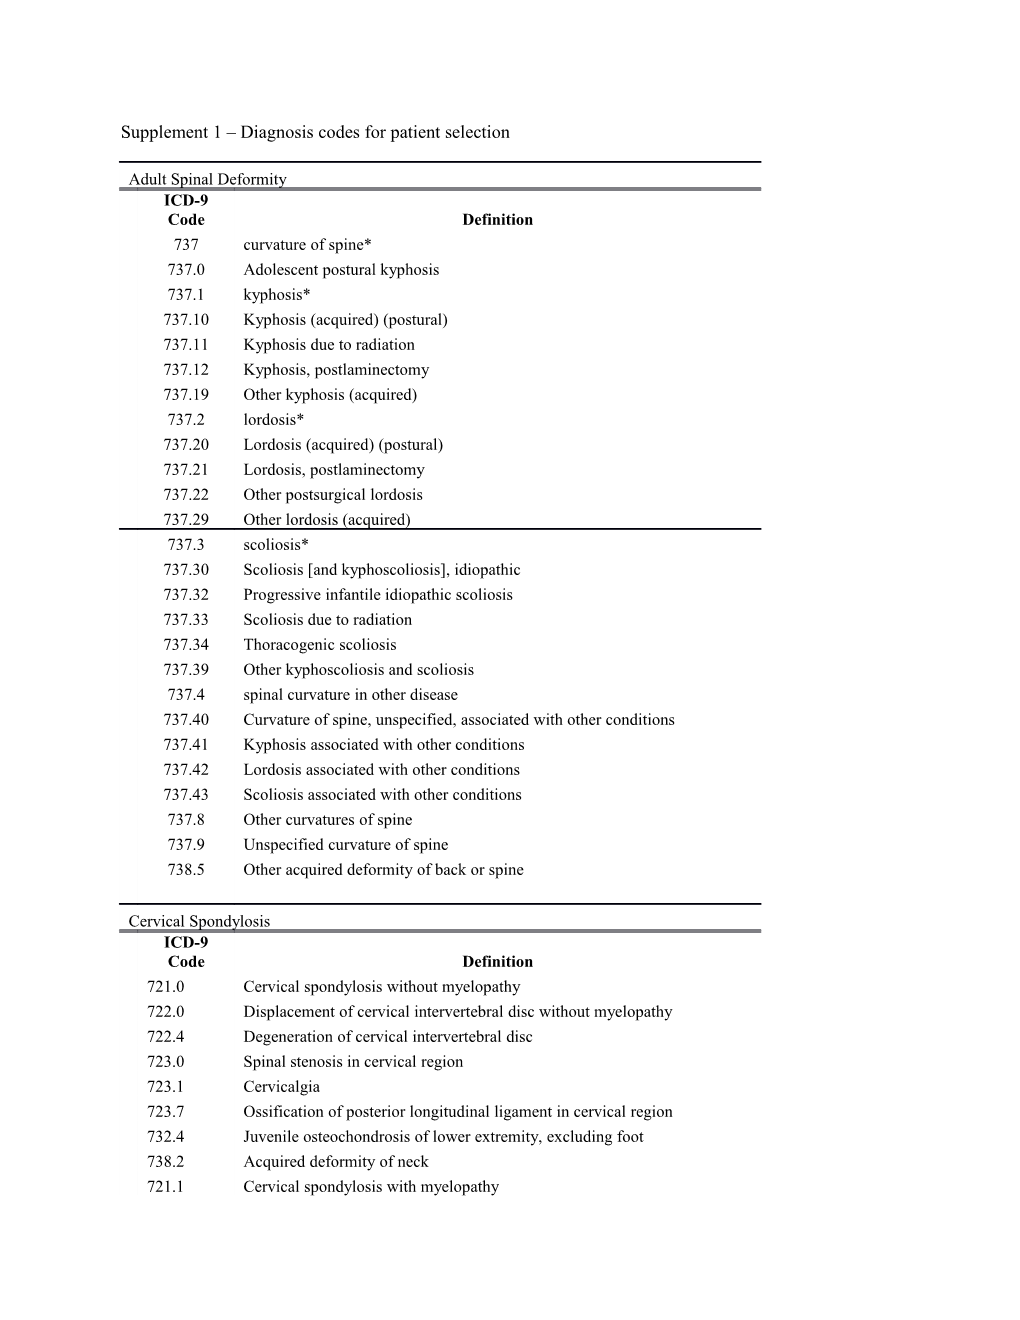 Supplement 1 Diagnosis Codes for Patient Selection